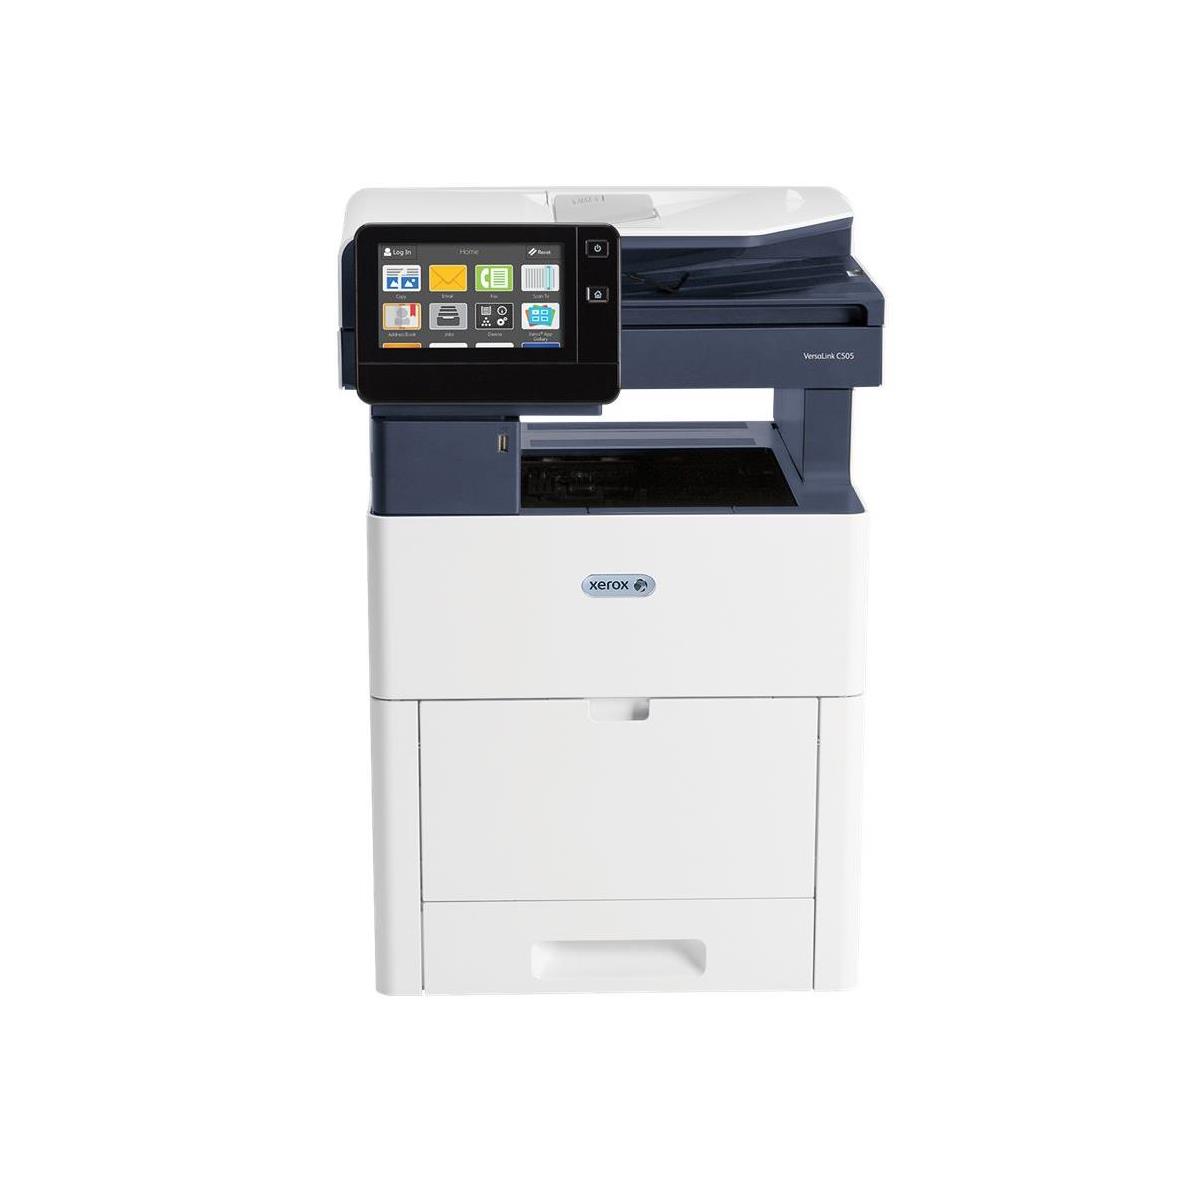 VersaLink  All-In-One Color Laser Printer with 250GB HDD - Xerox C505/X